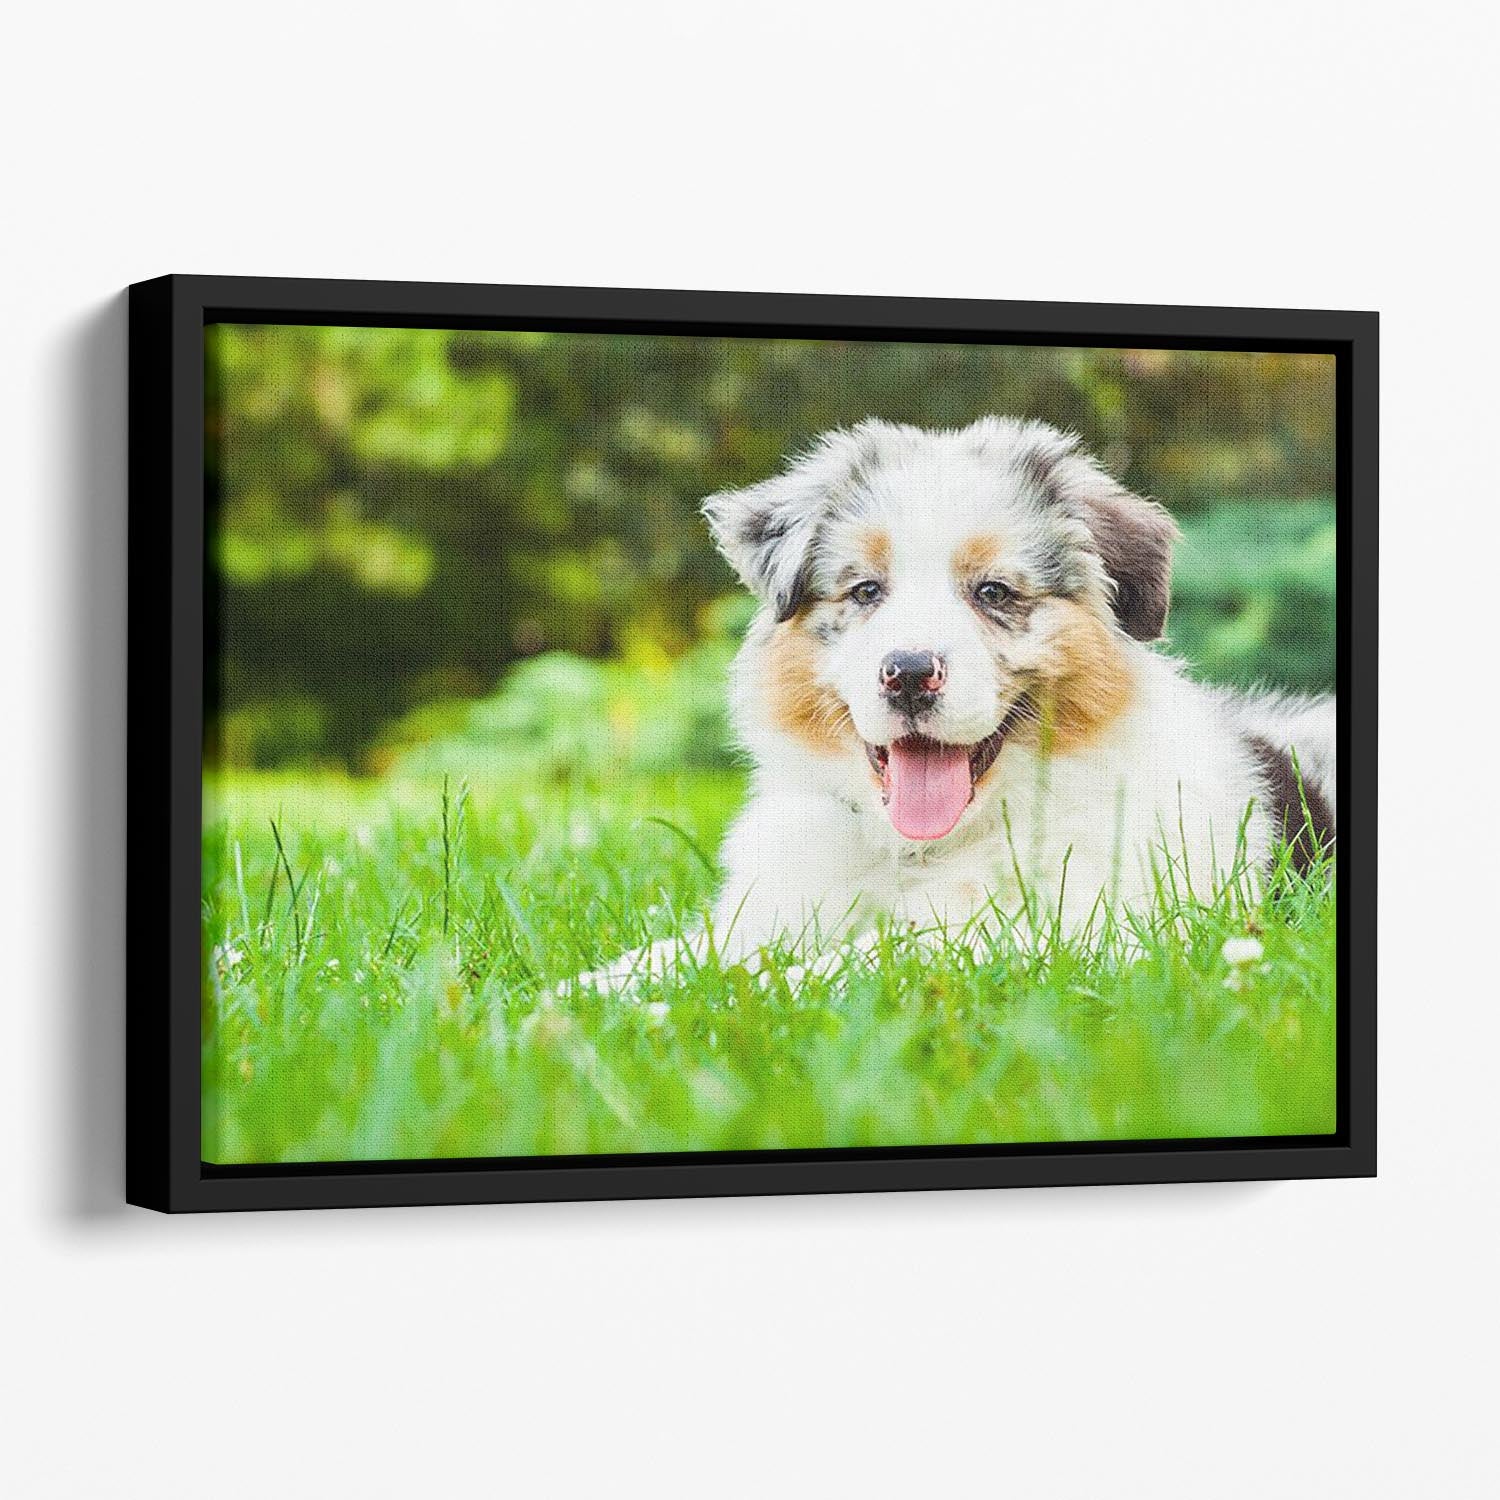 Young puppy lying on fresh green grass in public park Floating Framed Canvas - Canvas Art Rocks - 1